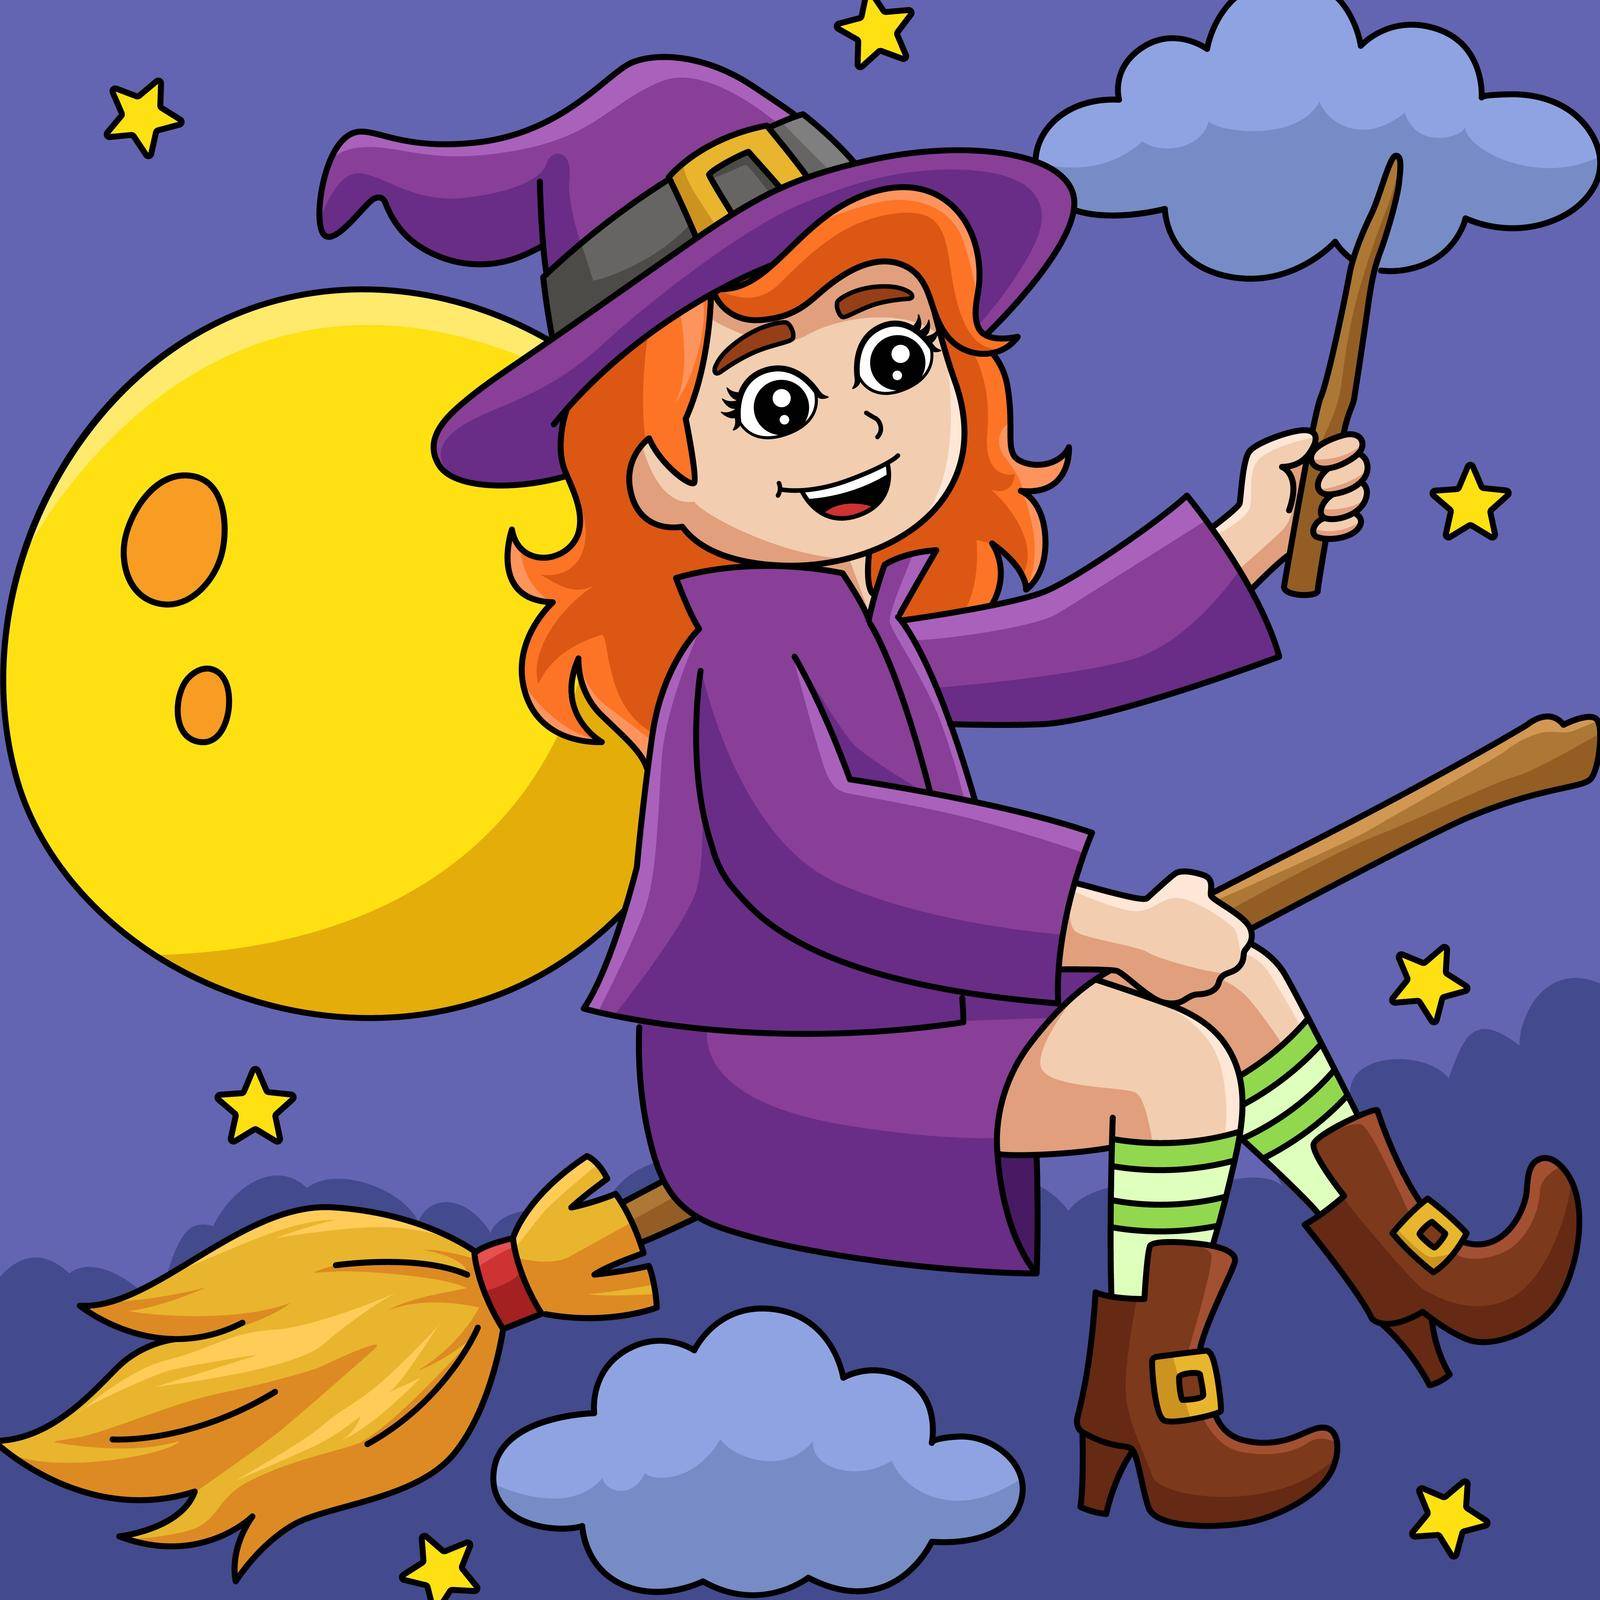 Witch Girl On A Broomstick Colored Illustration by abbydesign